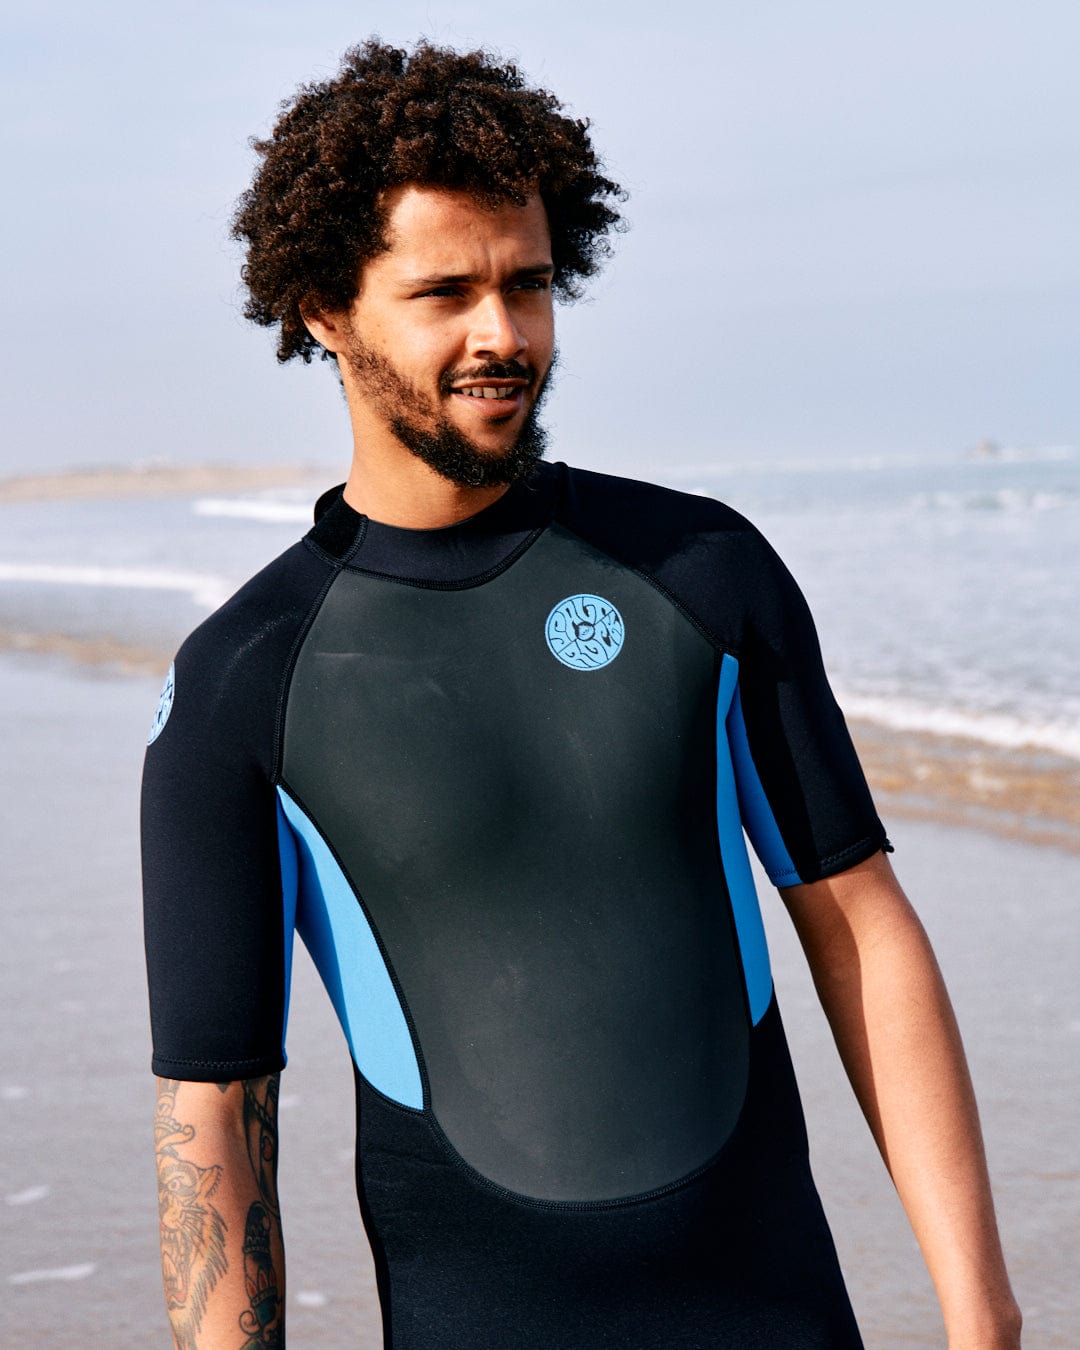 A man with curly hair wearing a Saltrock Core - Men's 3/2 Shortie Wetsuit in Black/blue stands on a beach, looking to the side, with the ocean in the background.